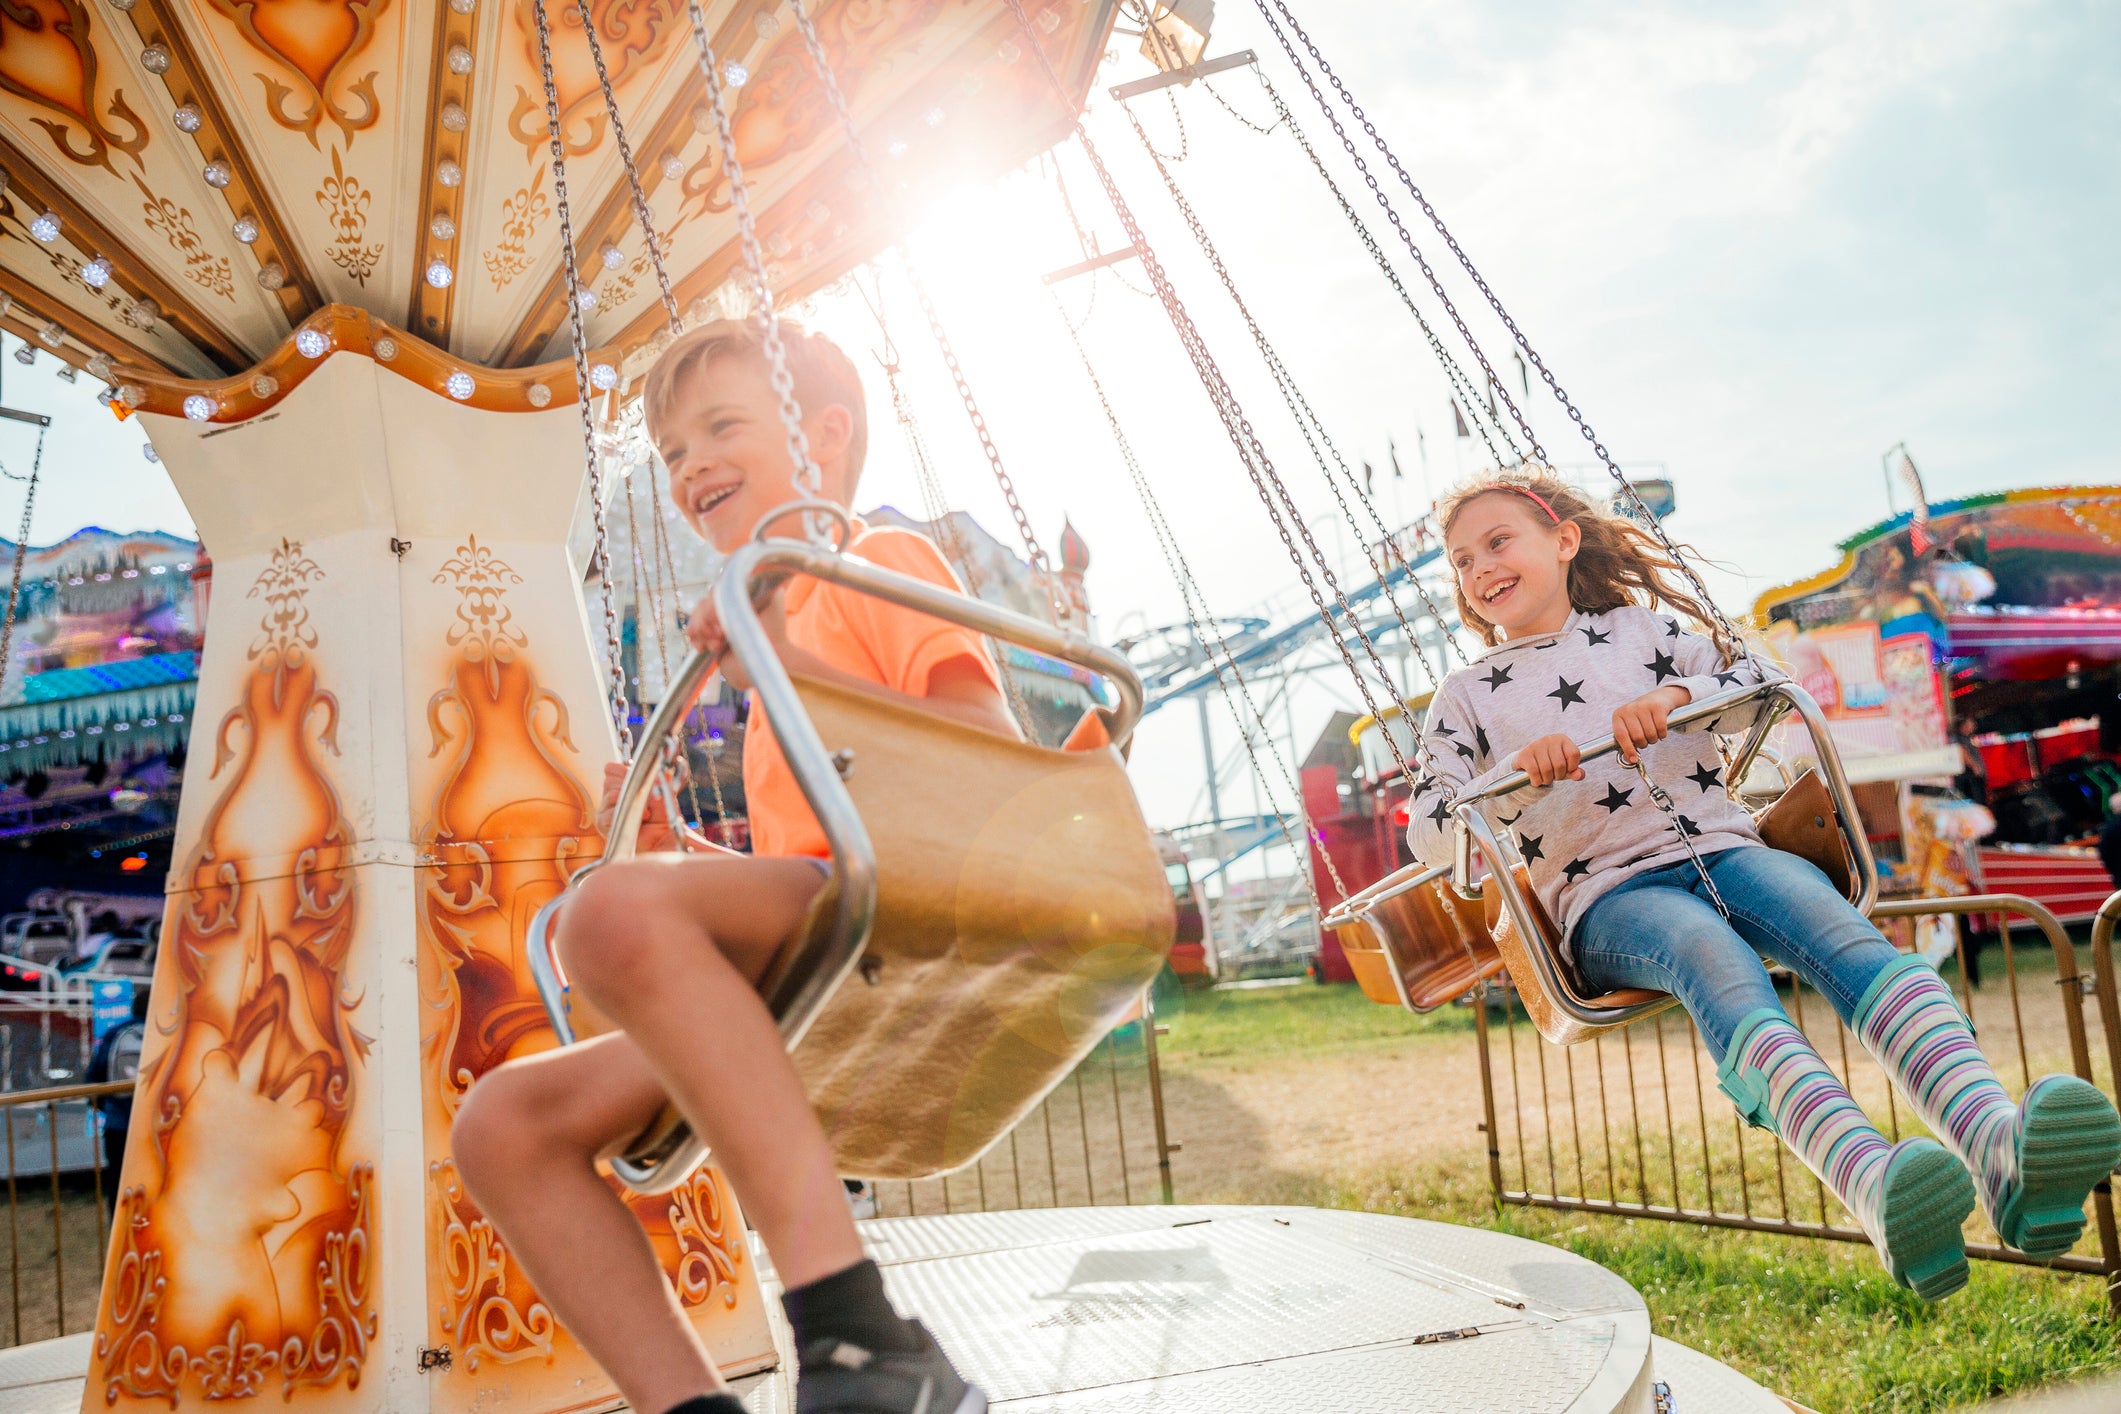 Children Riding on the Swings at the Fairground